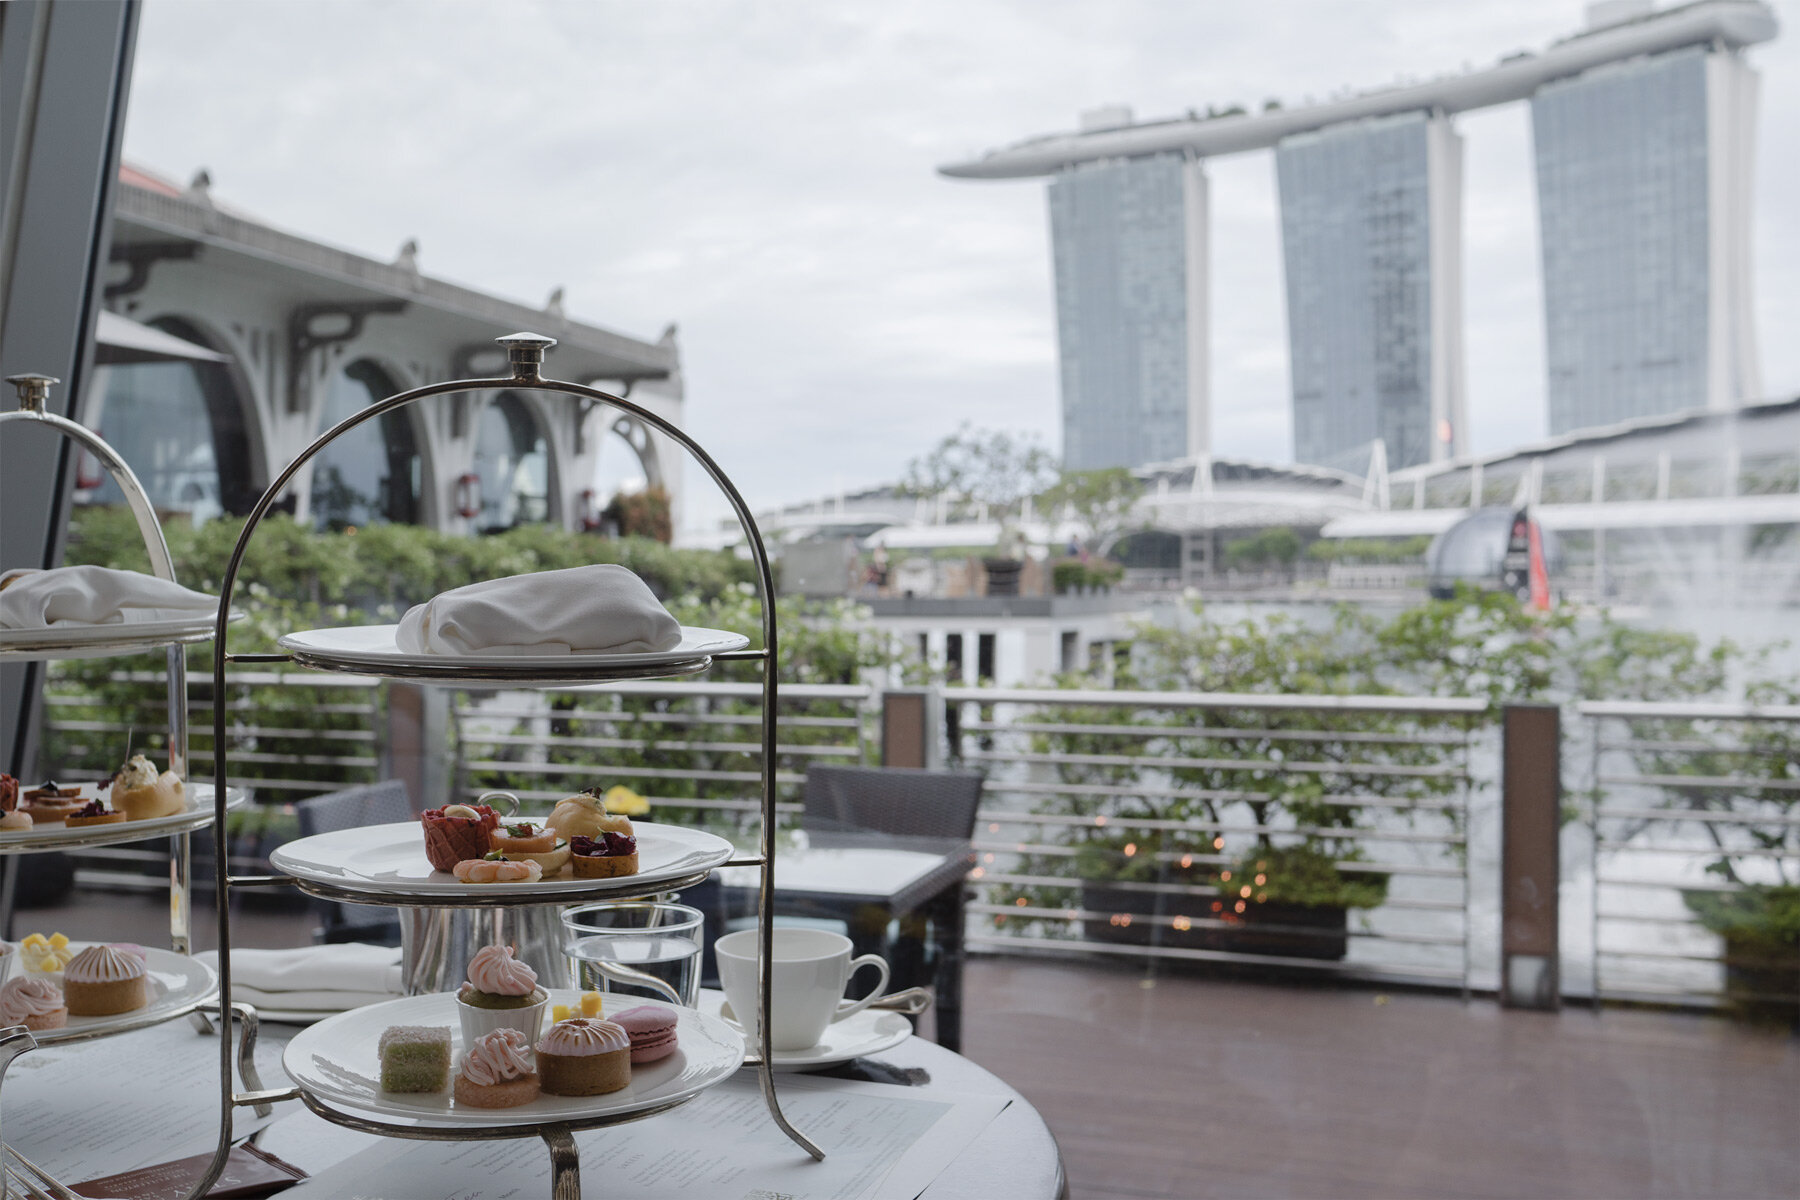 At the Landing Point you have a first class view of the Marina Bay Sands and the bay.